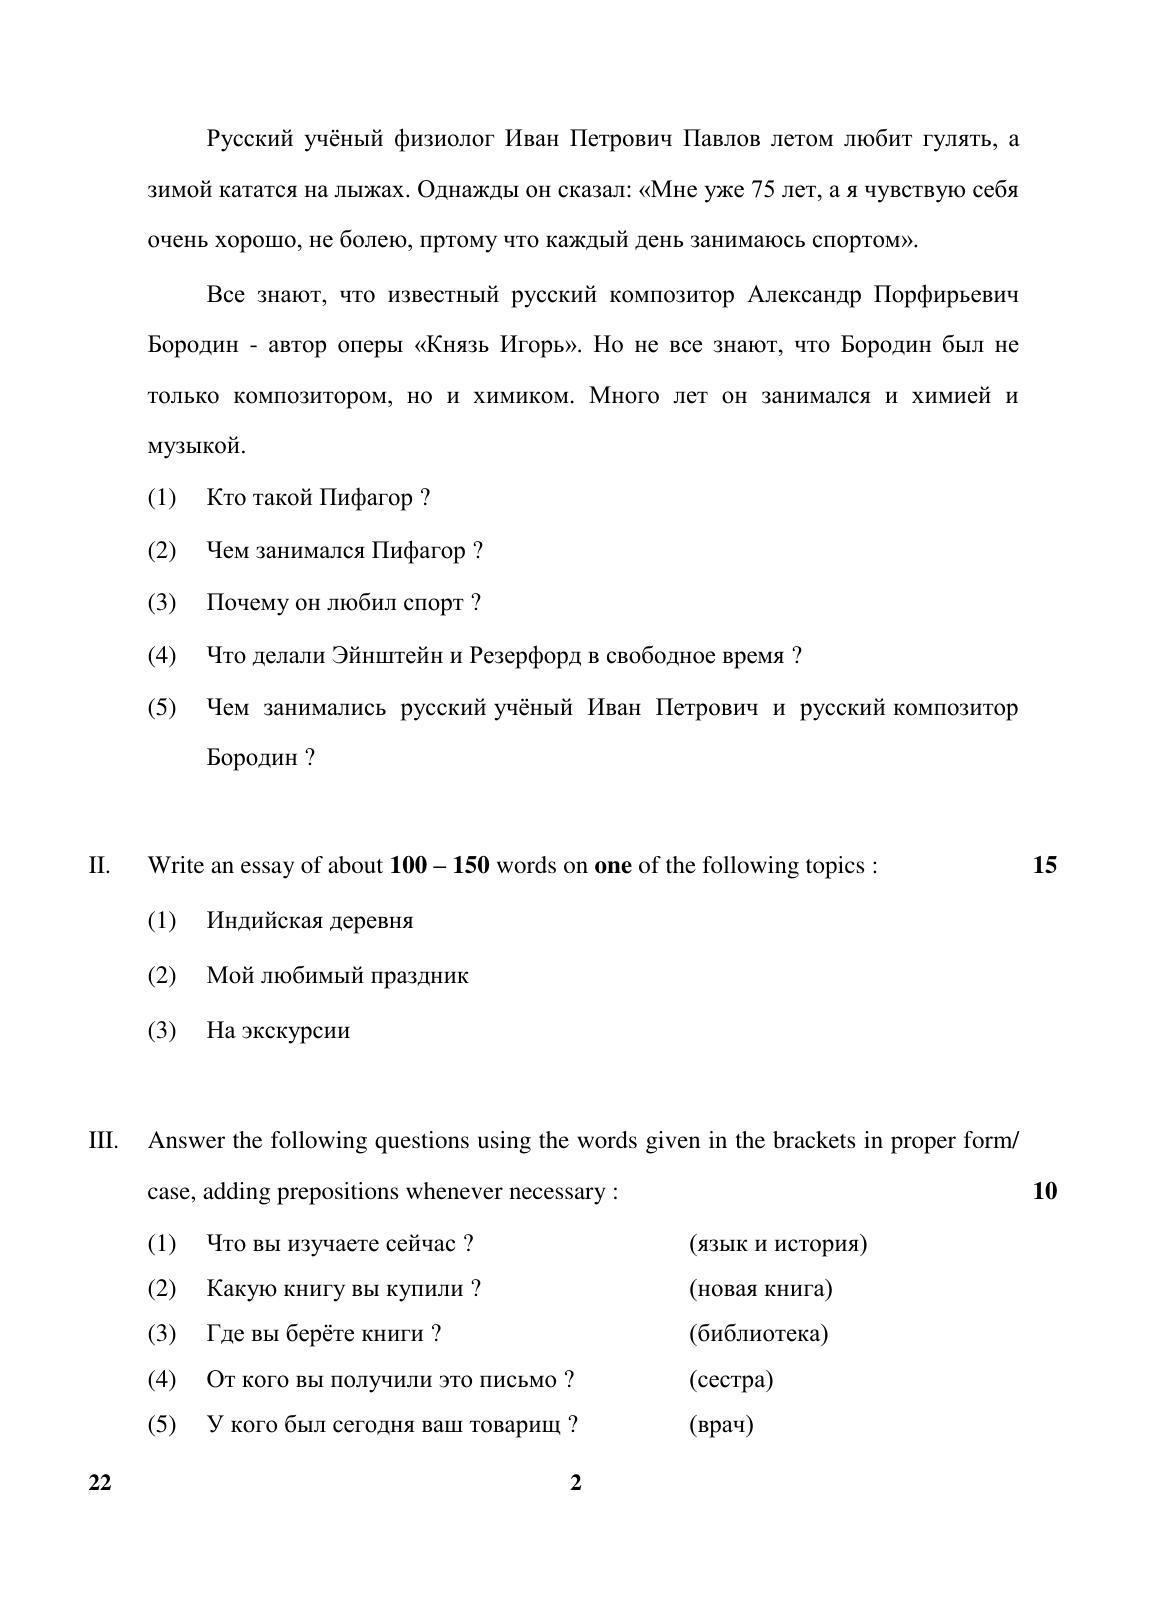 CBSE Class 10 22 (Russian) 2018 Question Paper - Page 2